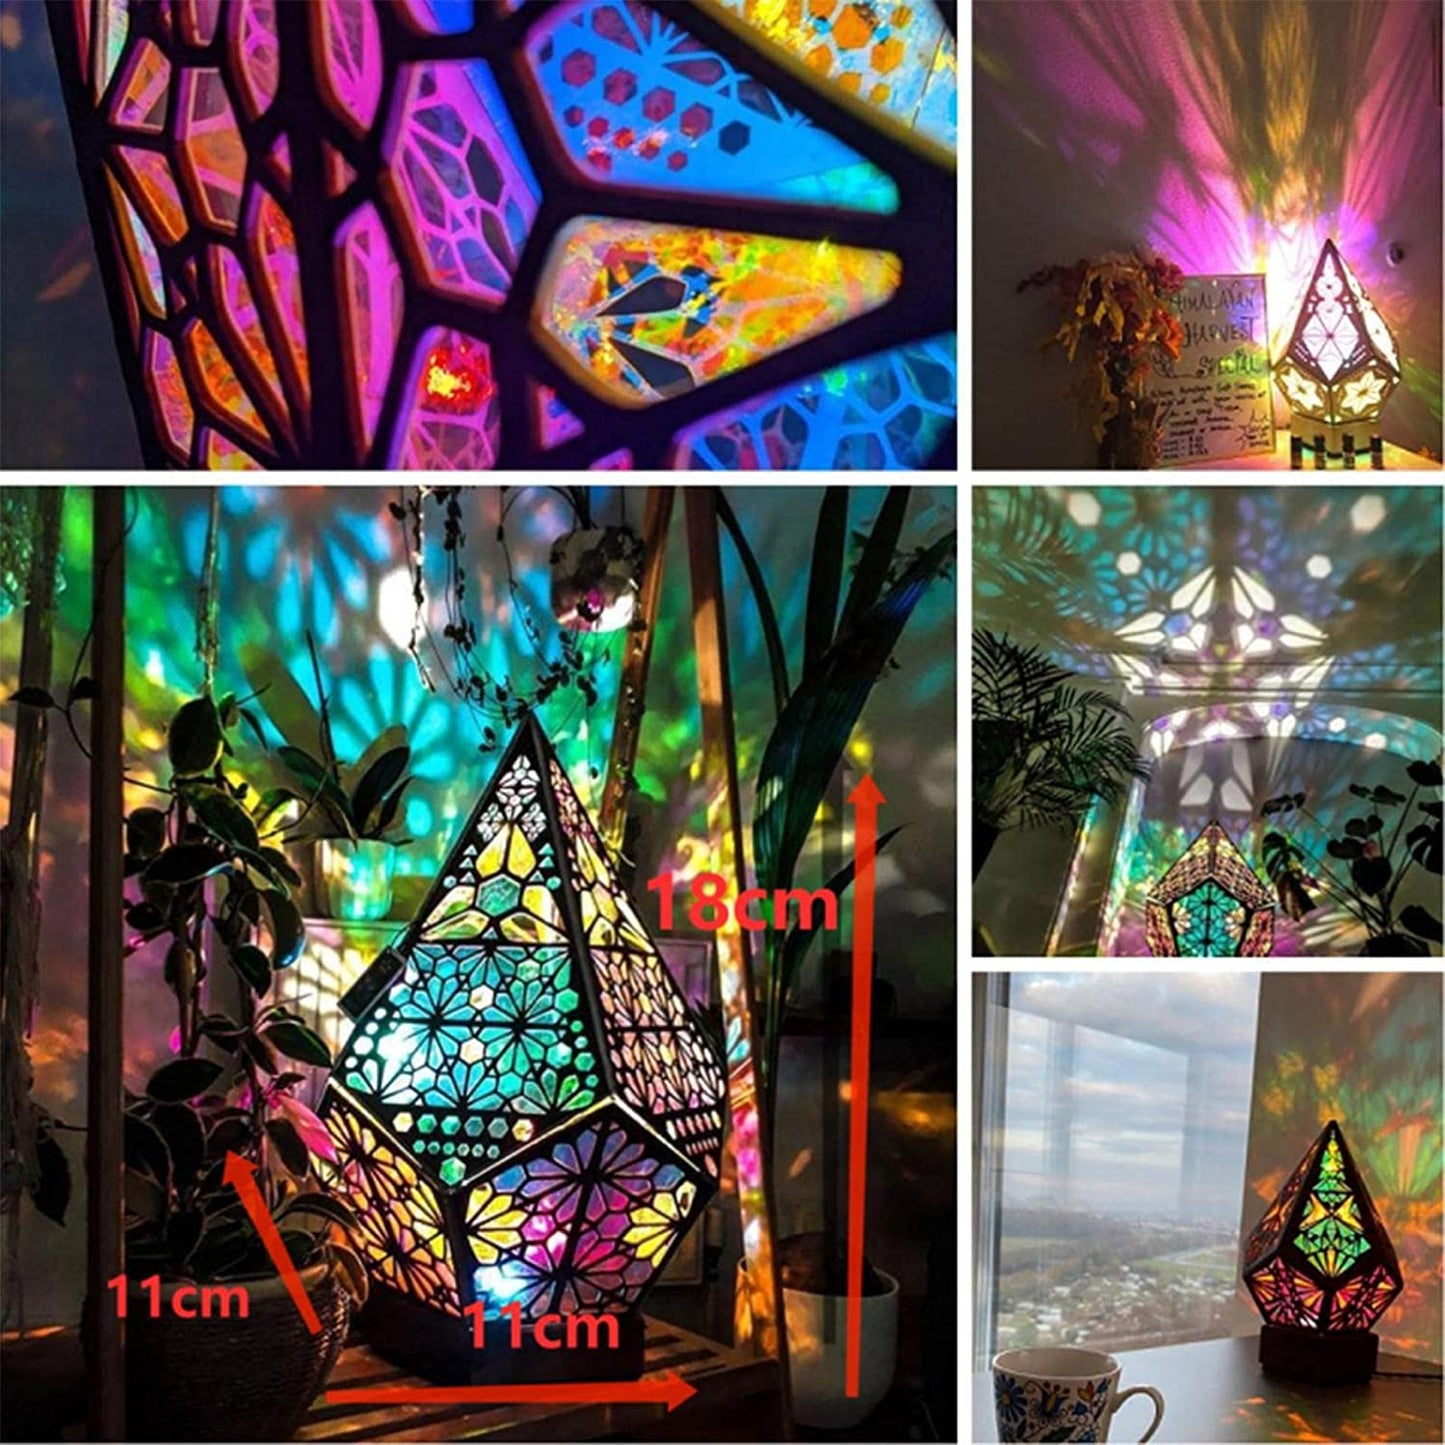 YUNAIYI Colorful Projection Lamps Creative Bohemian Hollow Iron Art Battery Powered Floor Lamp Holiday Wedding Birthday Party Atmosphere Lights for Home Garden Corridor Decoration